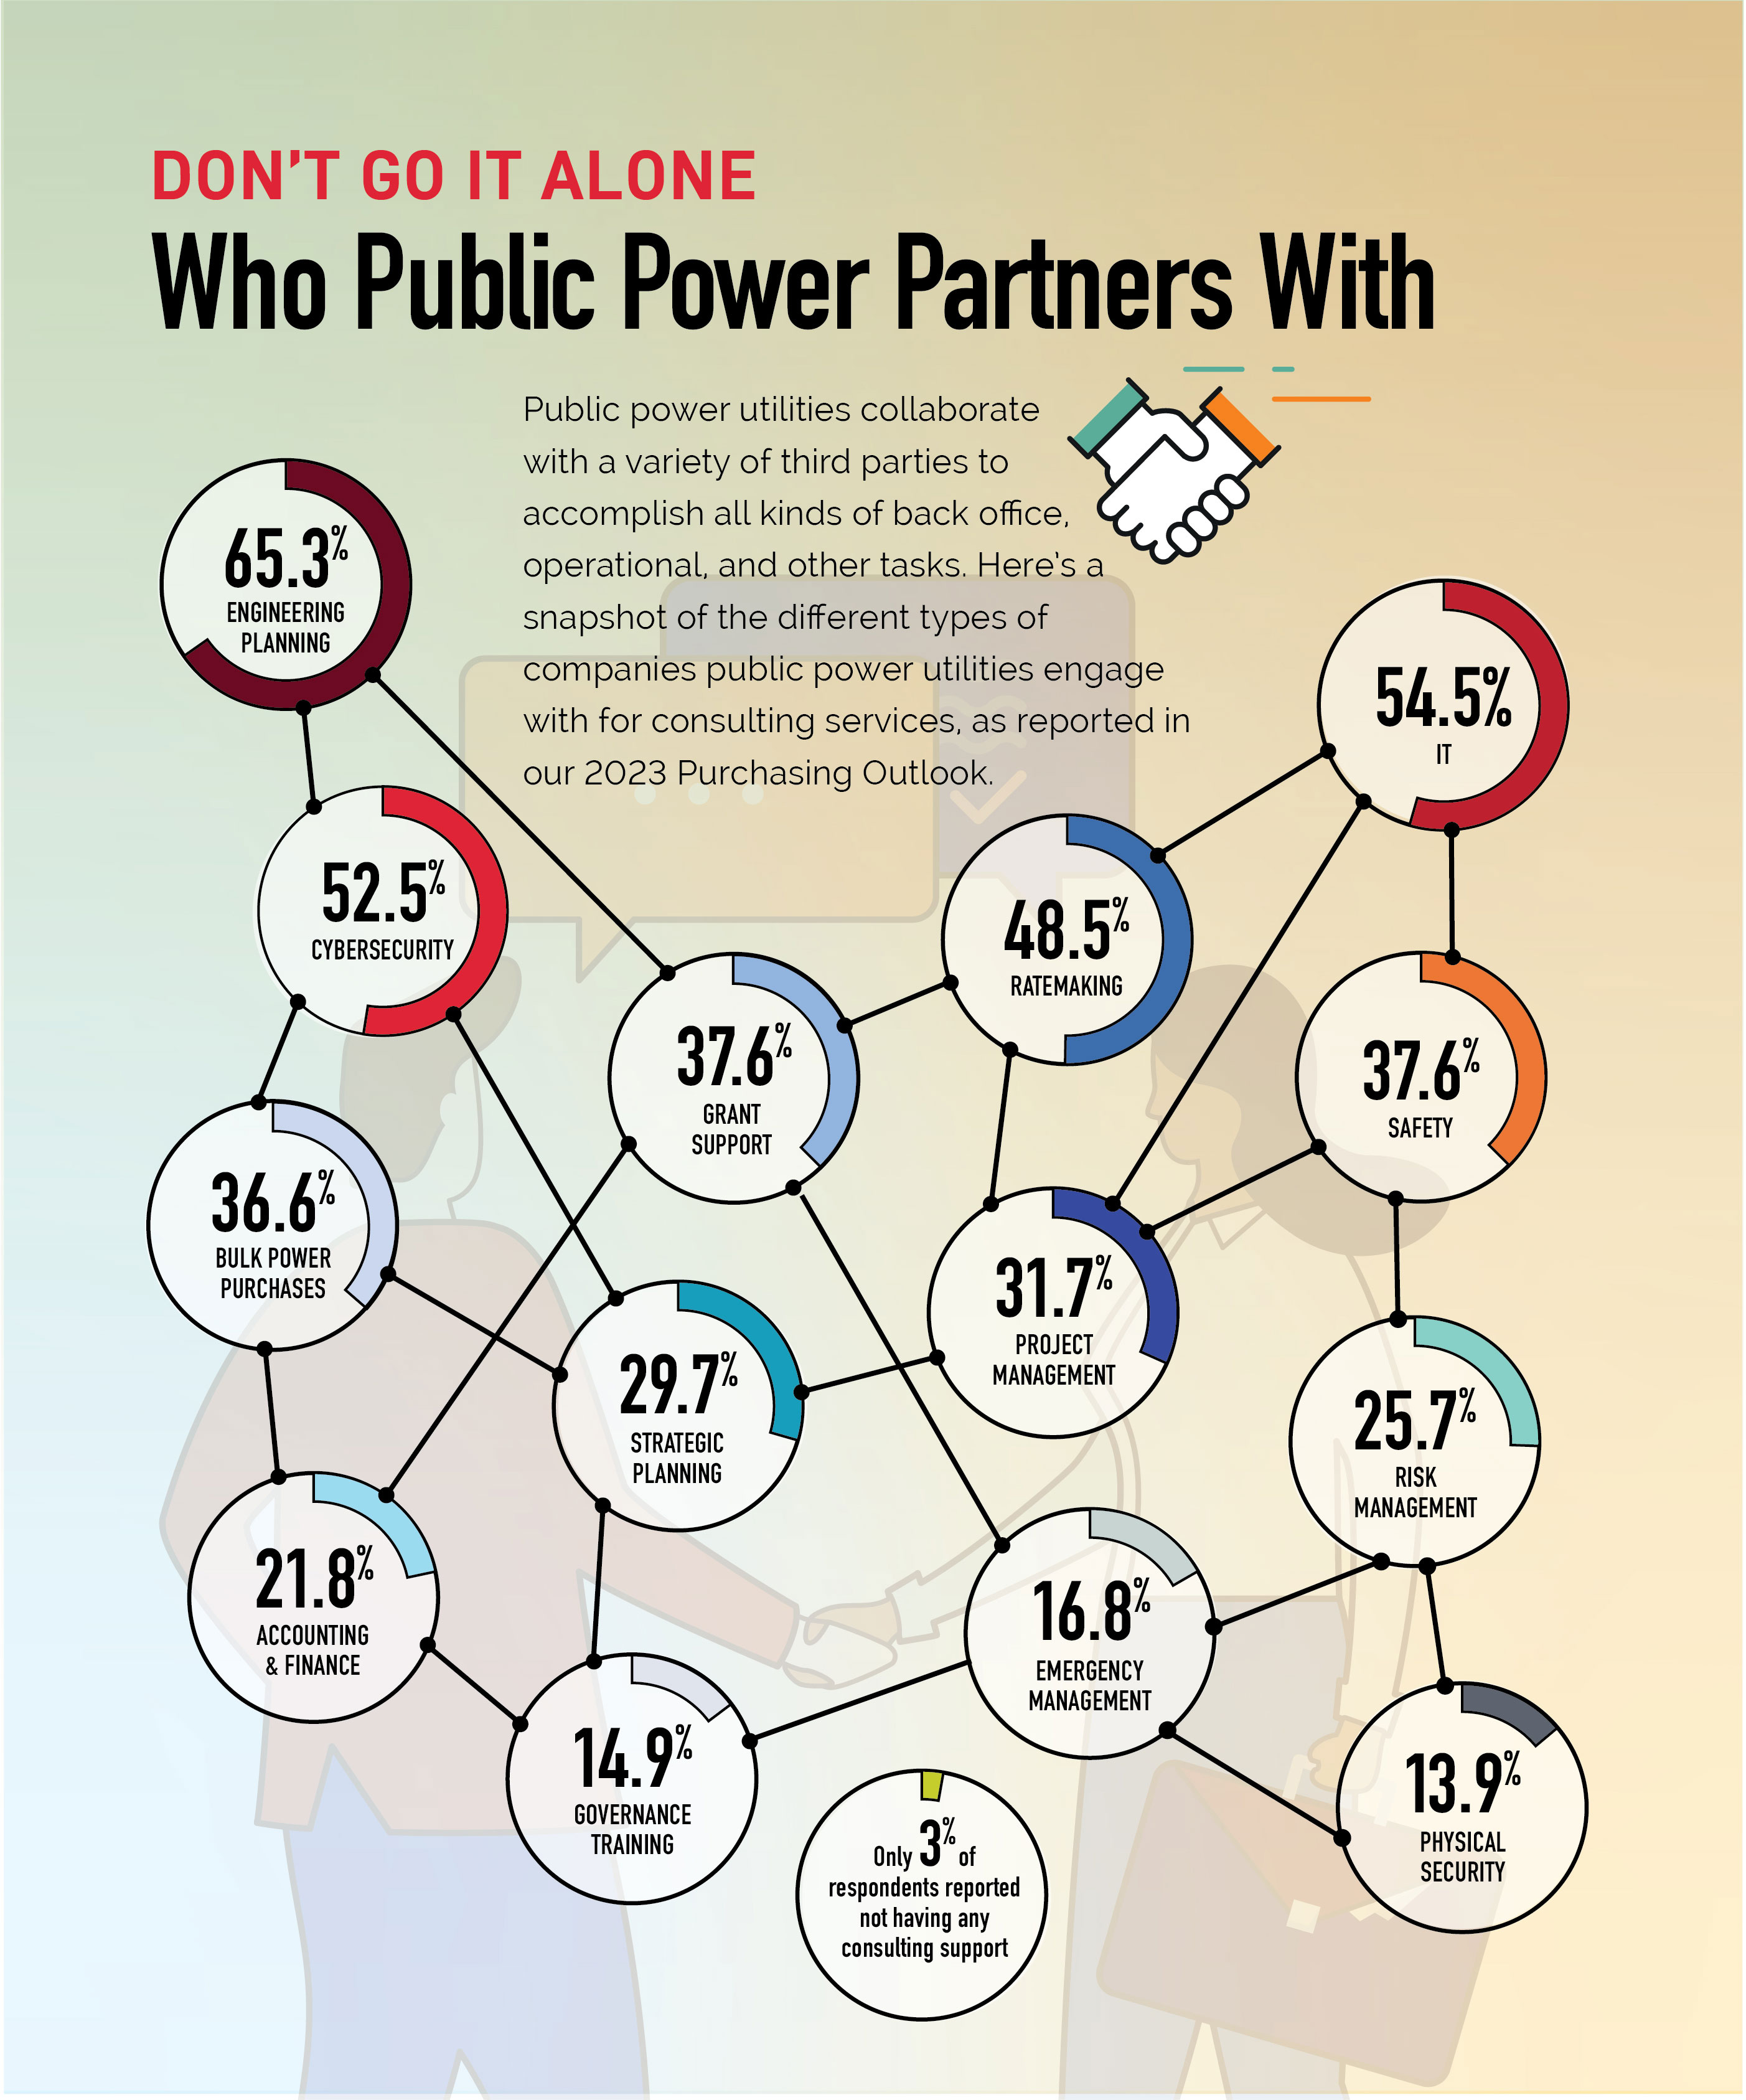 Infographic displaying the percent of public power utilities that engage third parties on different services